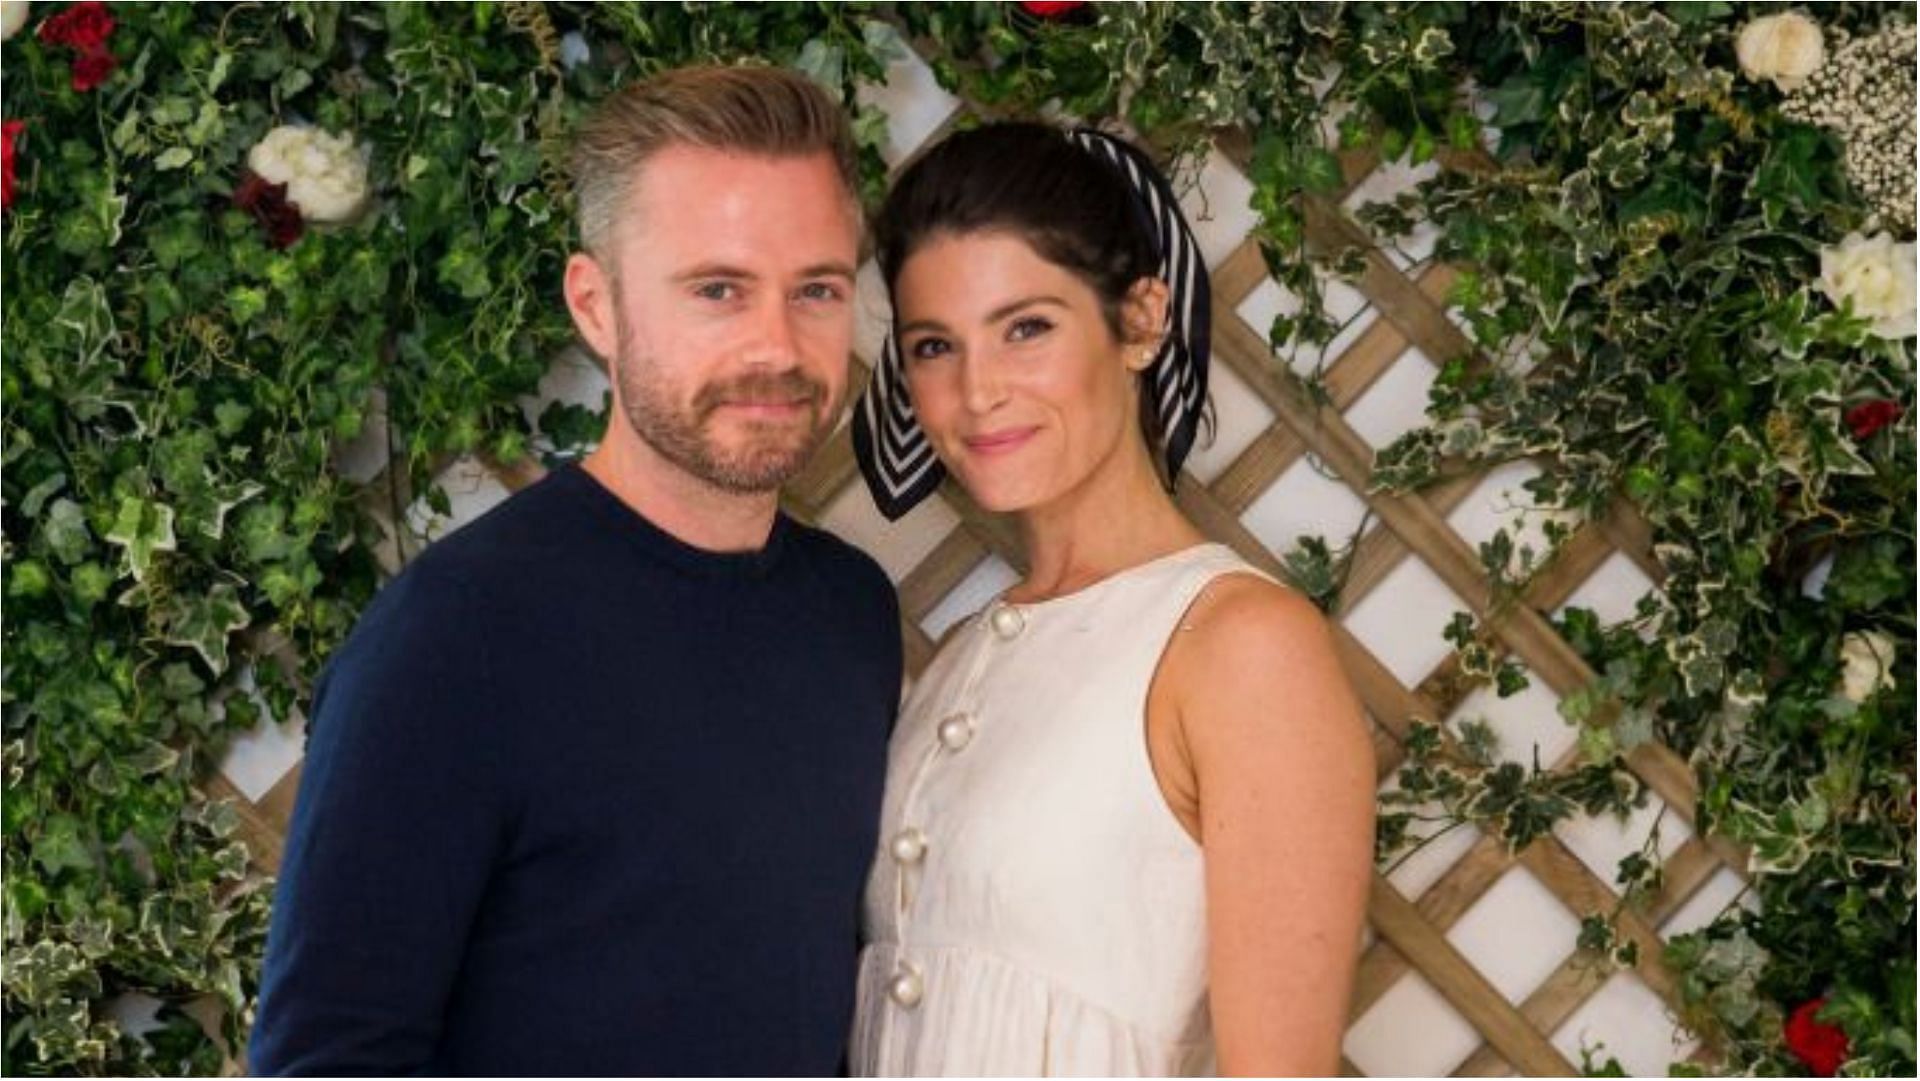 Gemma Arterton and Rory Keenan are all set to become parents (Image via Tristan Fewings/Getty Images)